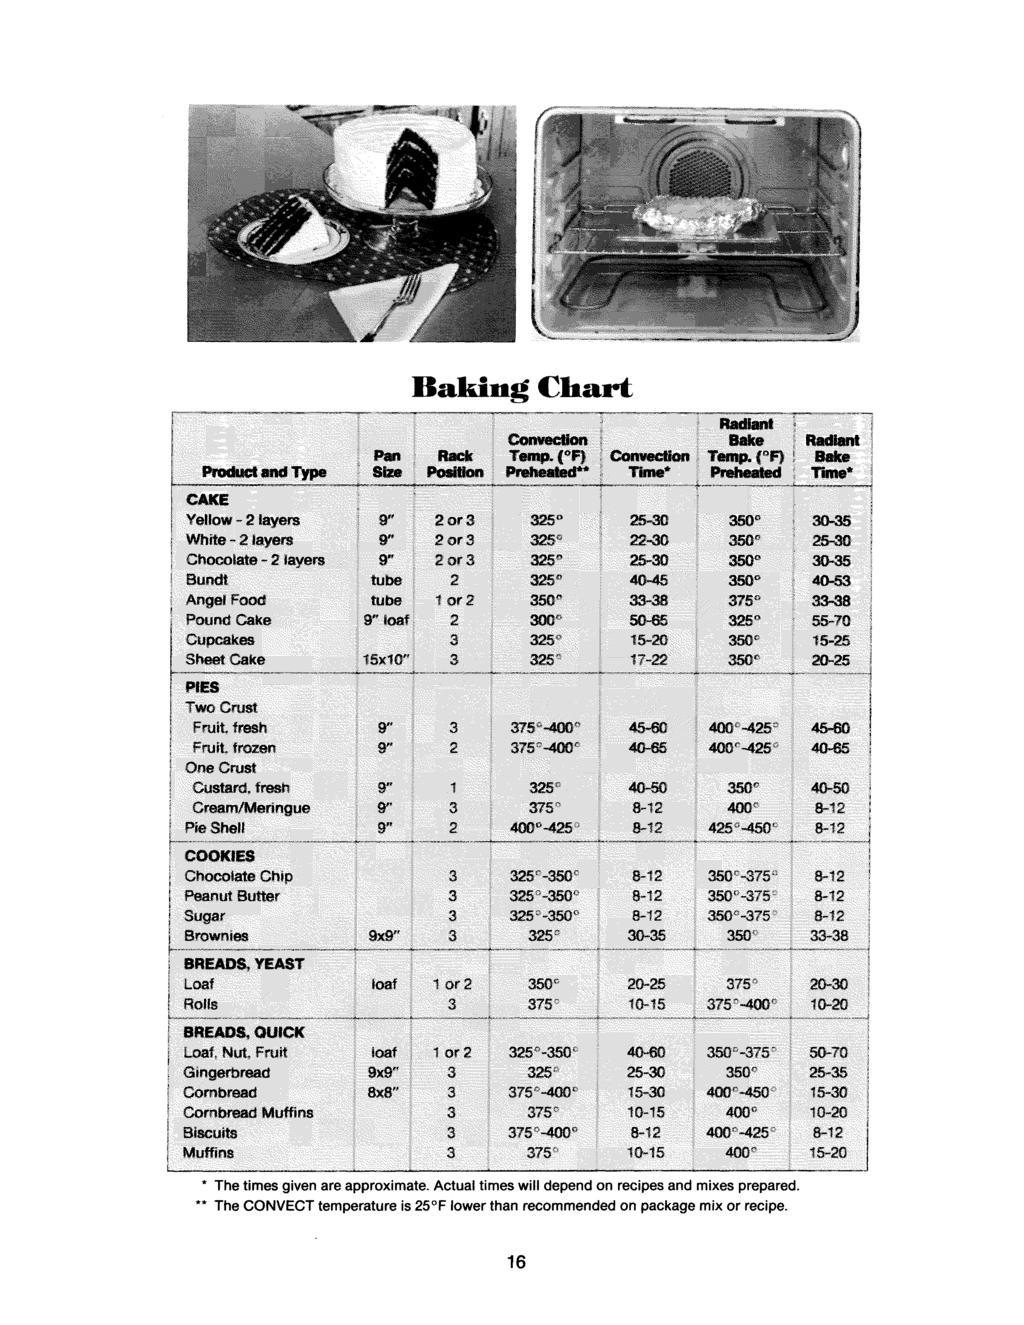 Baking Chart * The times given are approximate.